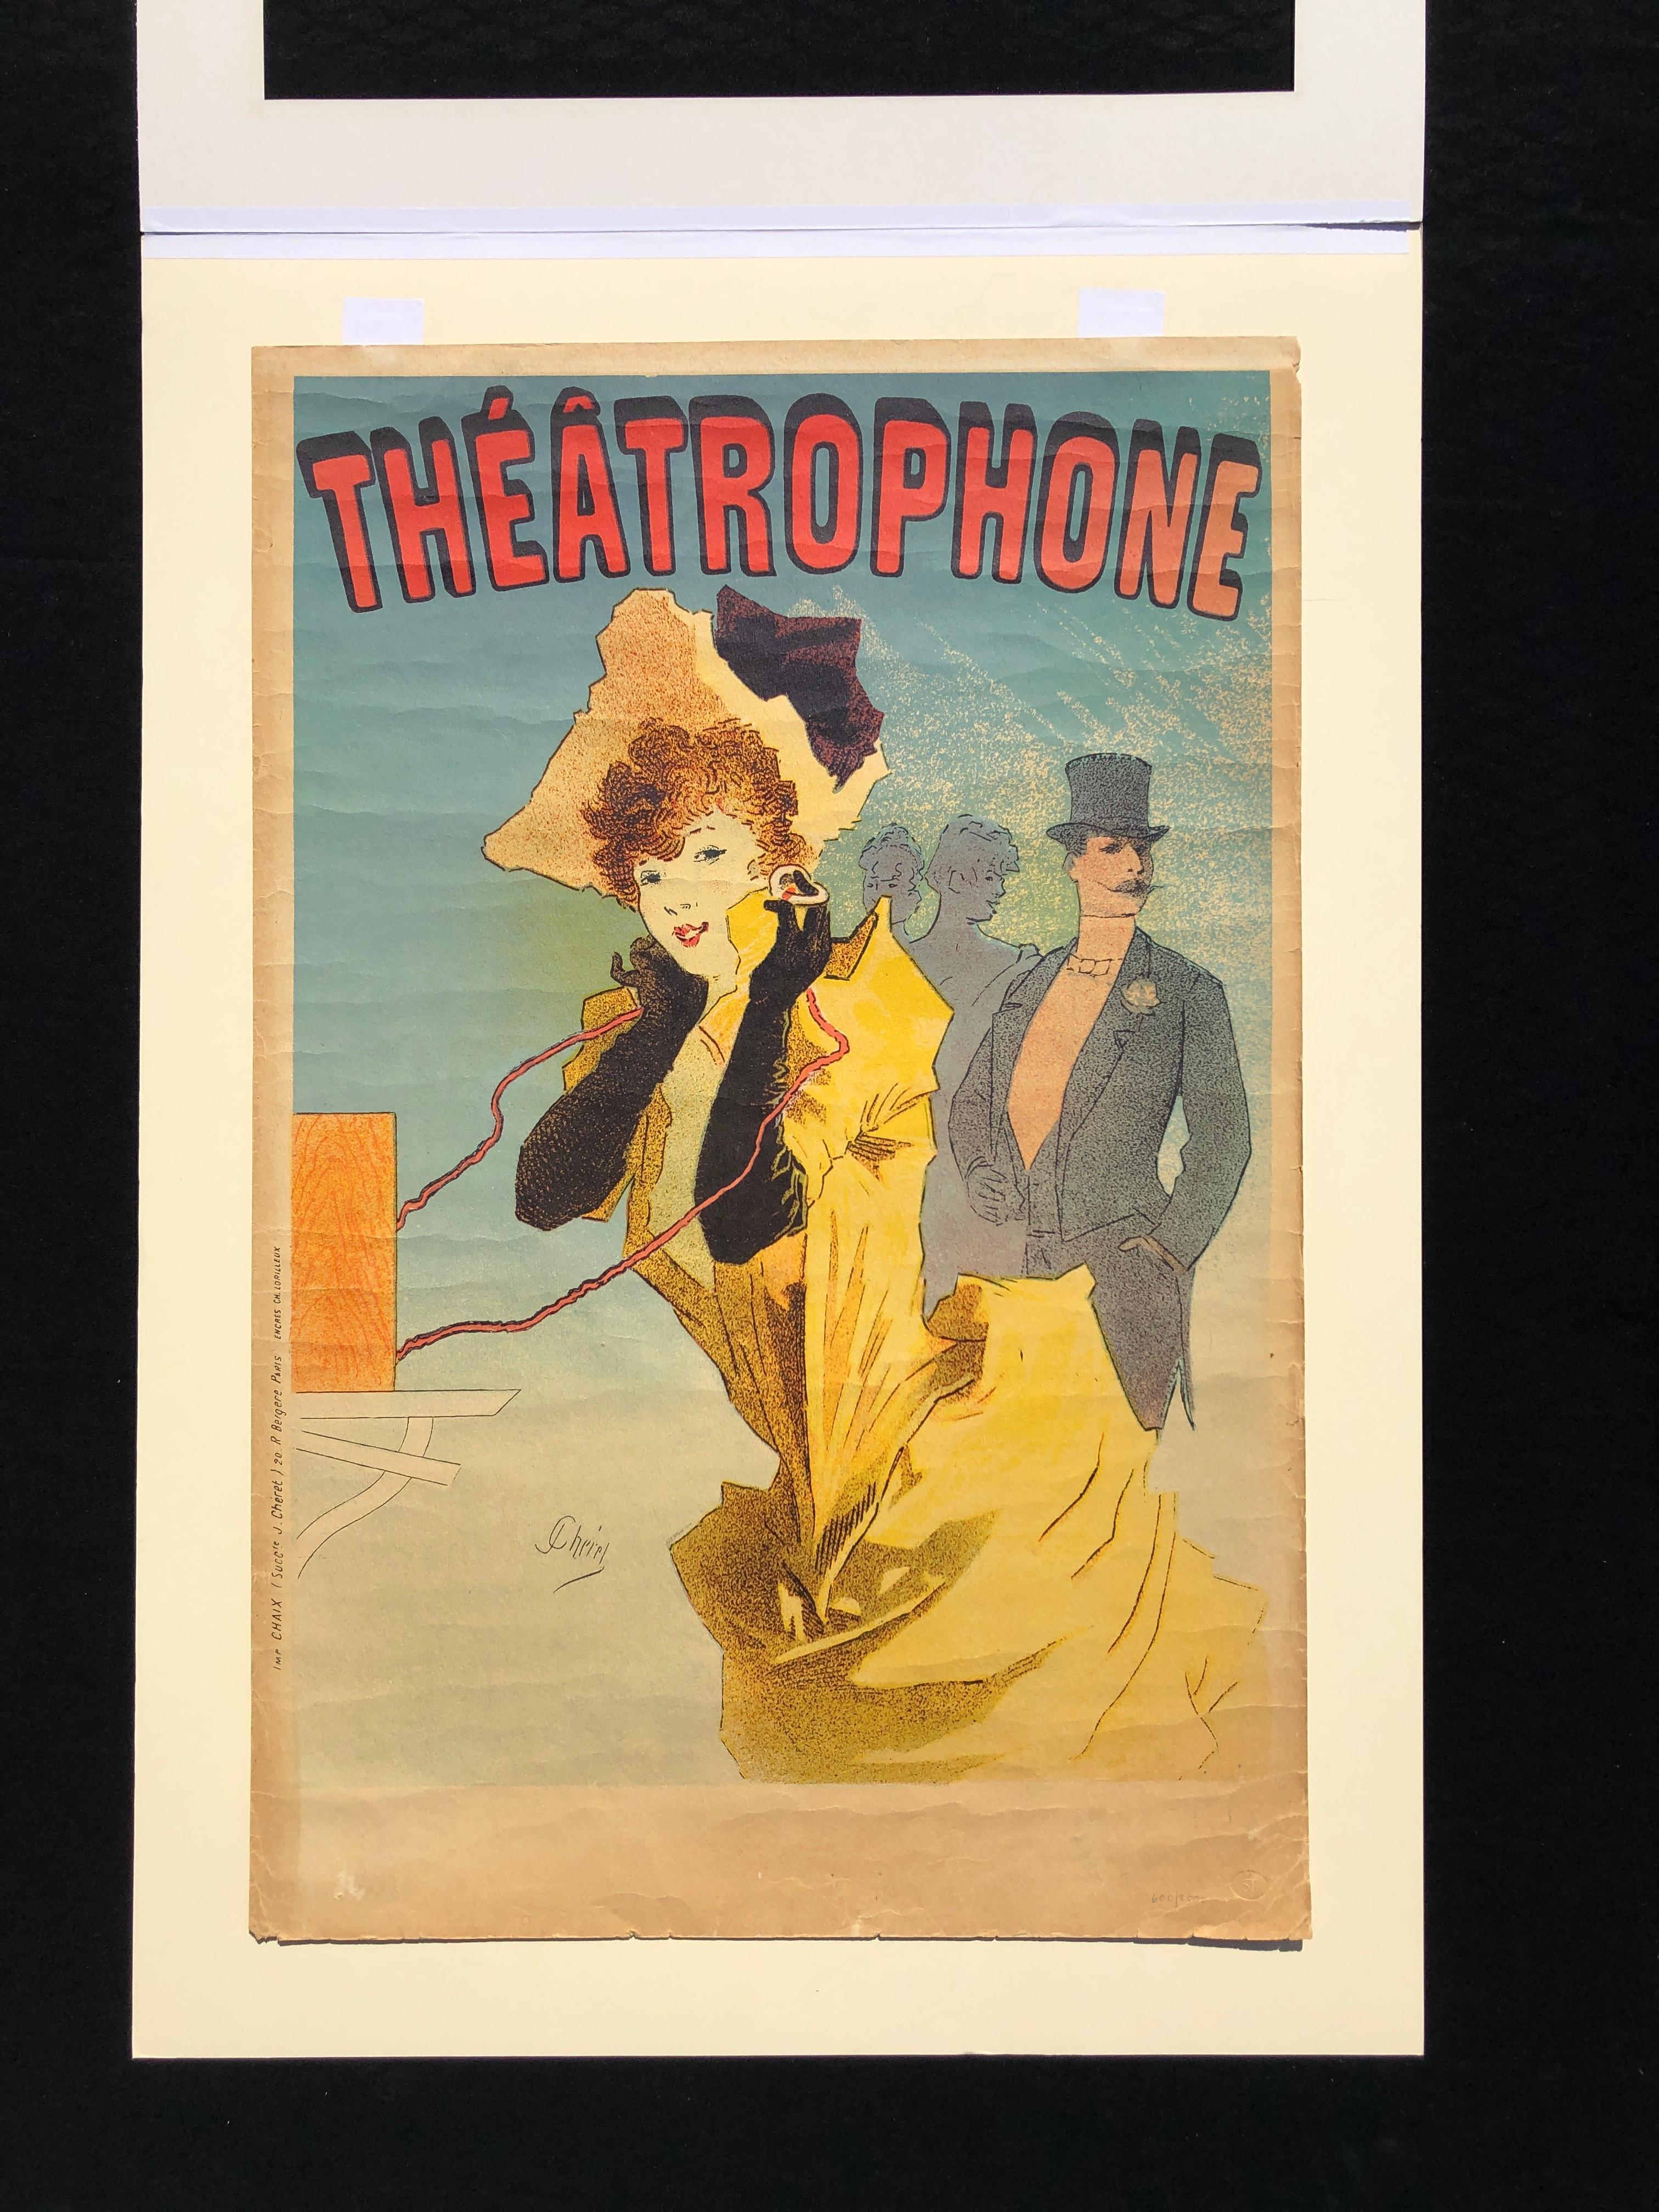 Le Théâtrophone - Vintage Art Nouveau Lithograph Poster by Jules Cheret In Good Condition For Sale In East Quogue, NY